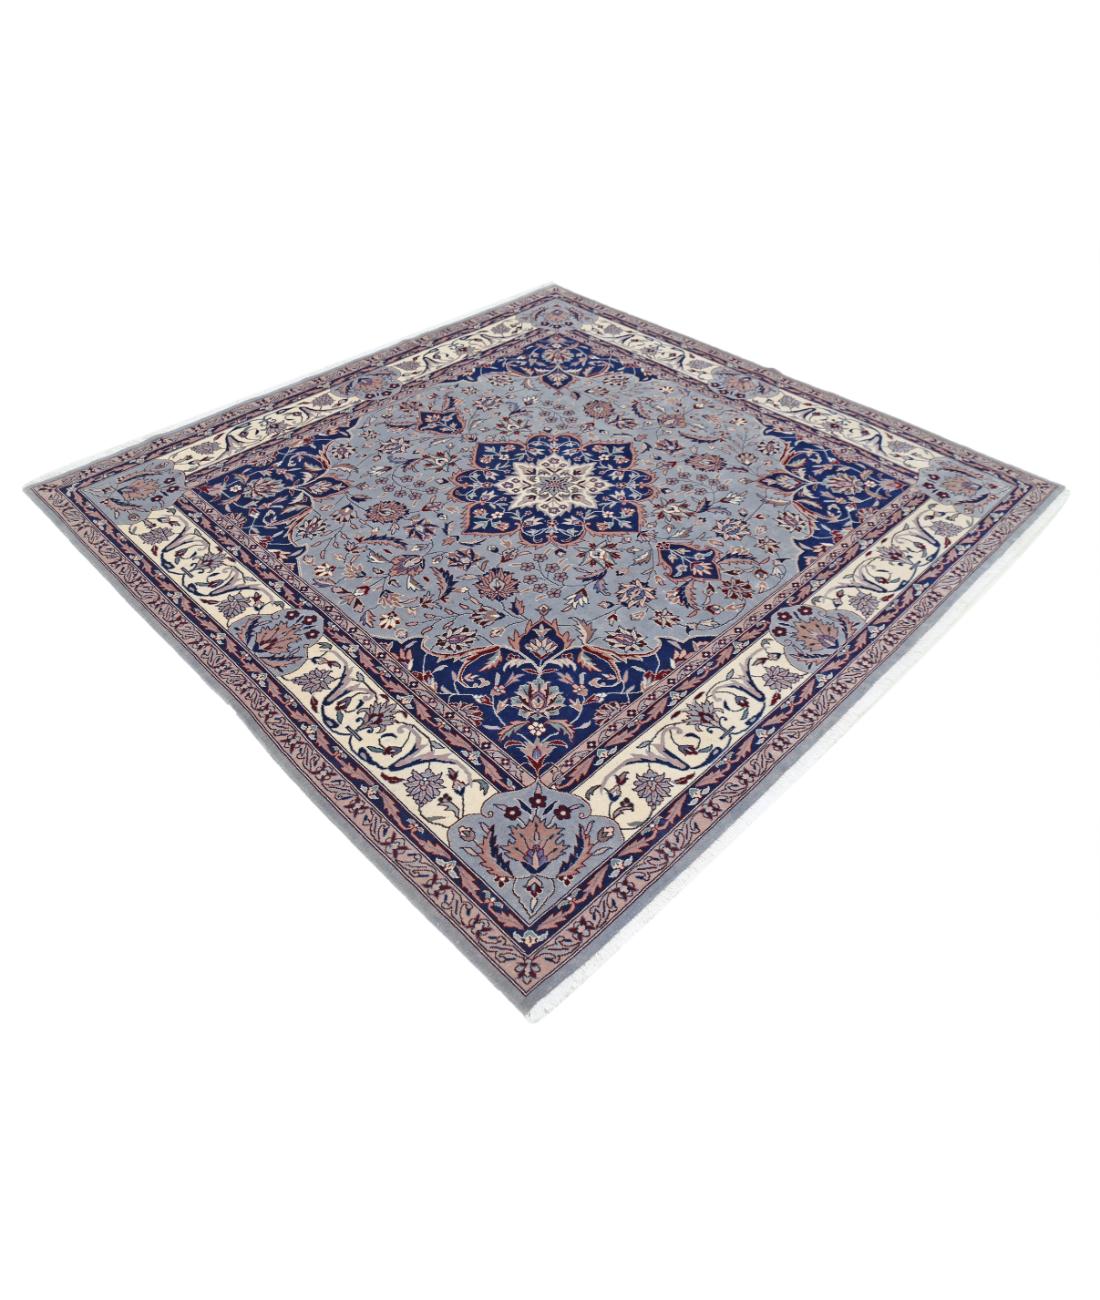 Hand Knotted Heritage Persian Style Wool Rug - 6'7'' x 6'10'' 6' 7" X 6' 10" (201 X 208) / Blue / Ivory